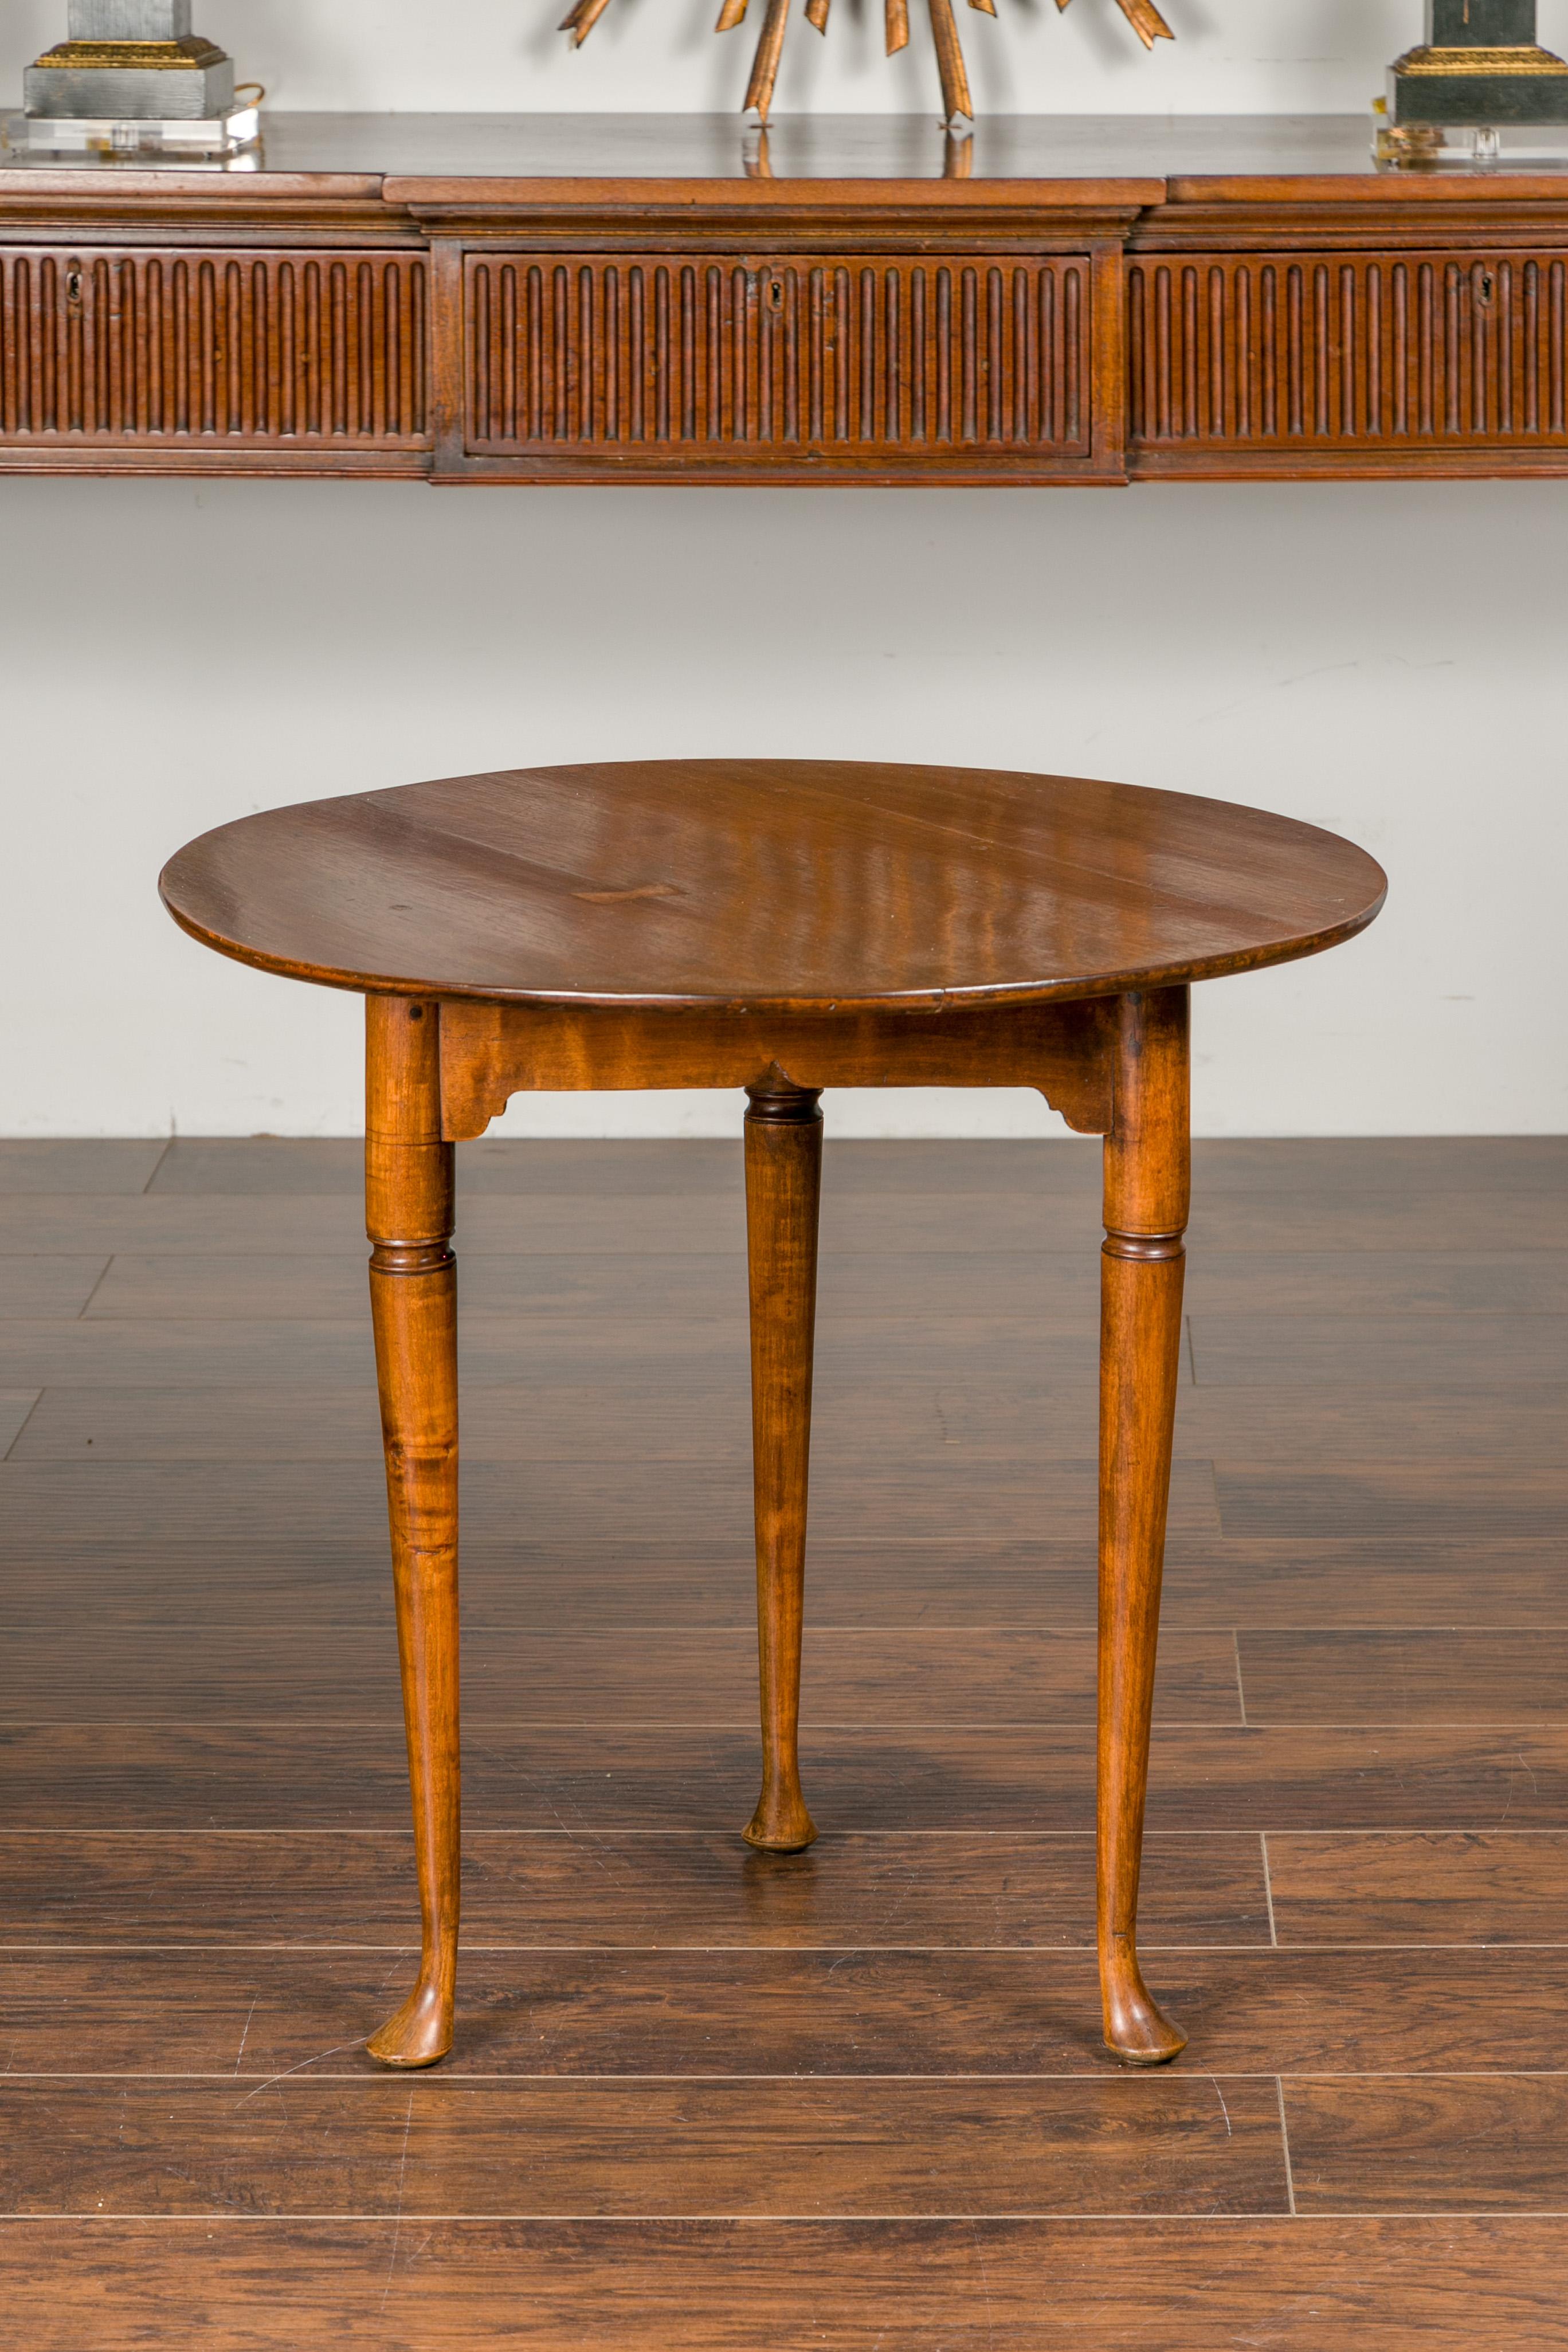 An English mahogany table from the mid-19th century, with circular top and pad feet. Created in England during the second quarter of the 19th century, this mahogany table features a round top sitting above a triangular apron. The table is raised on